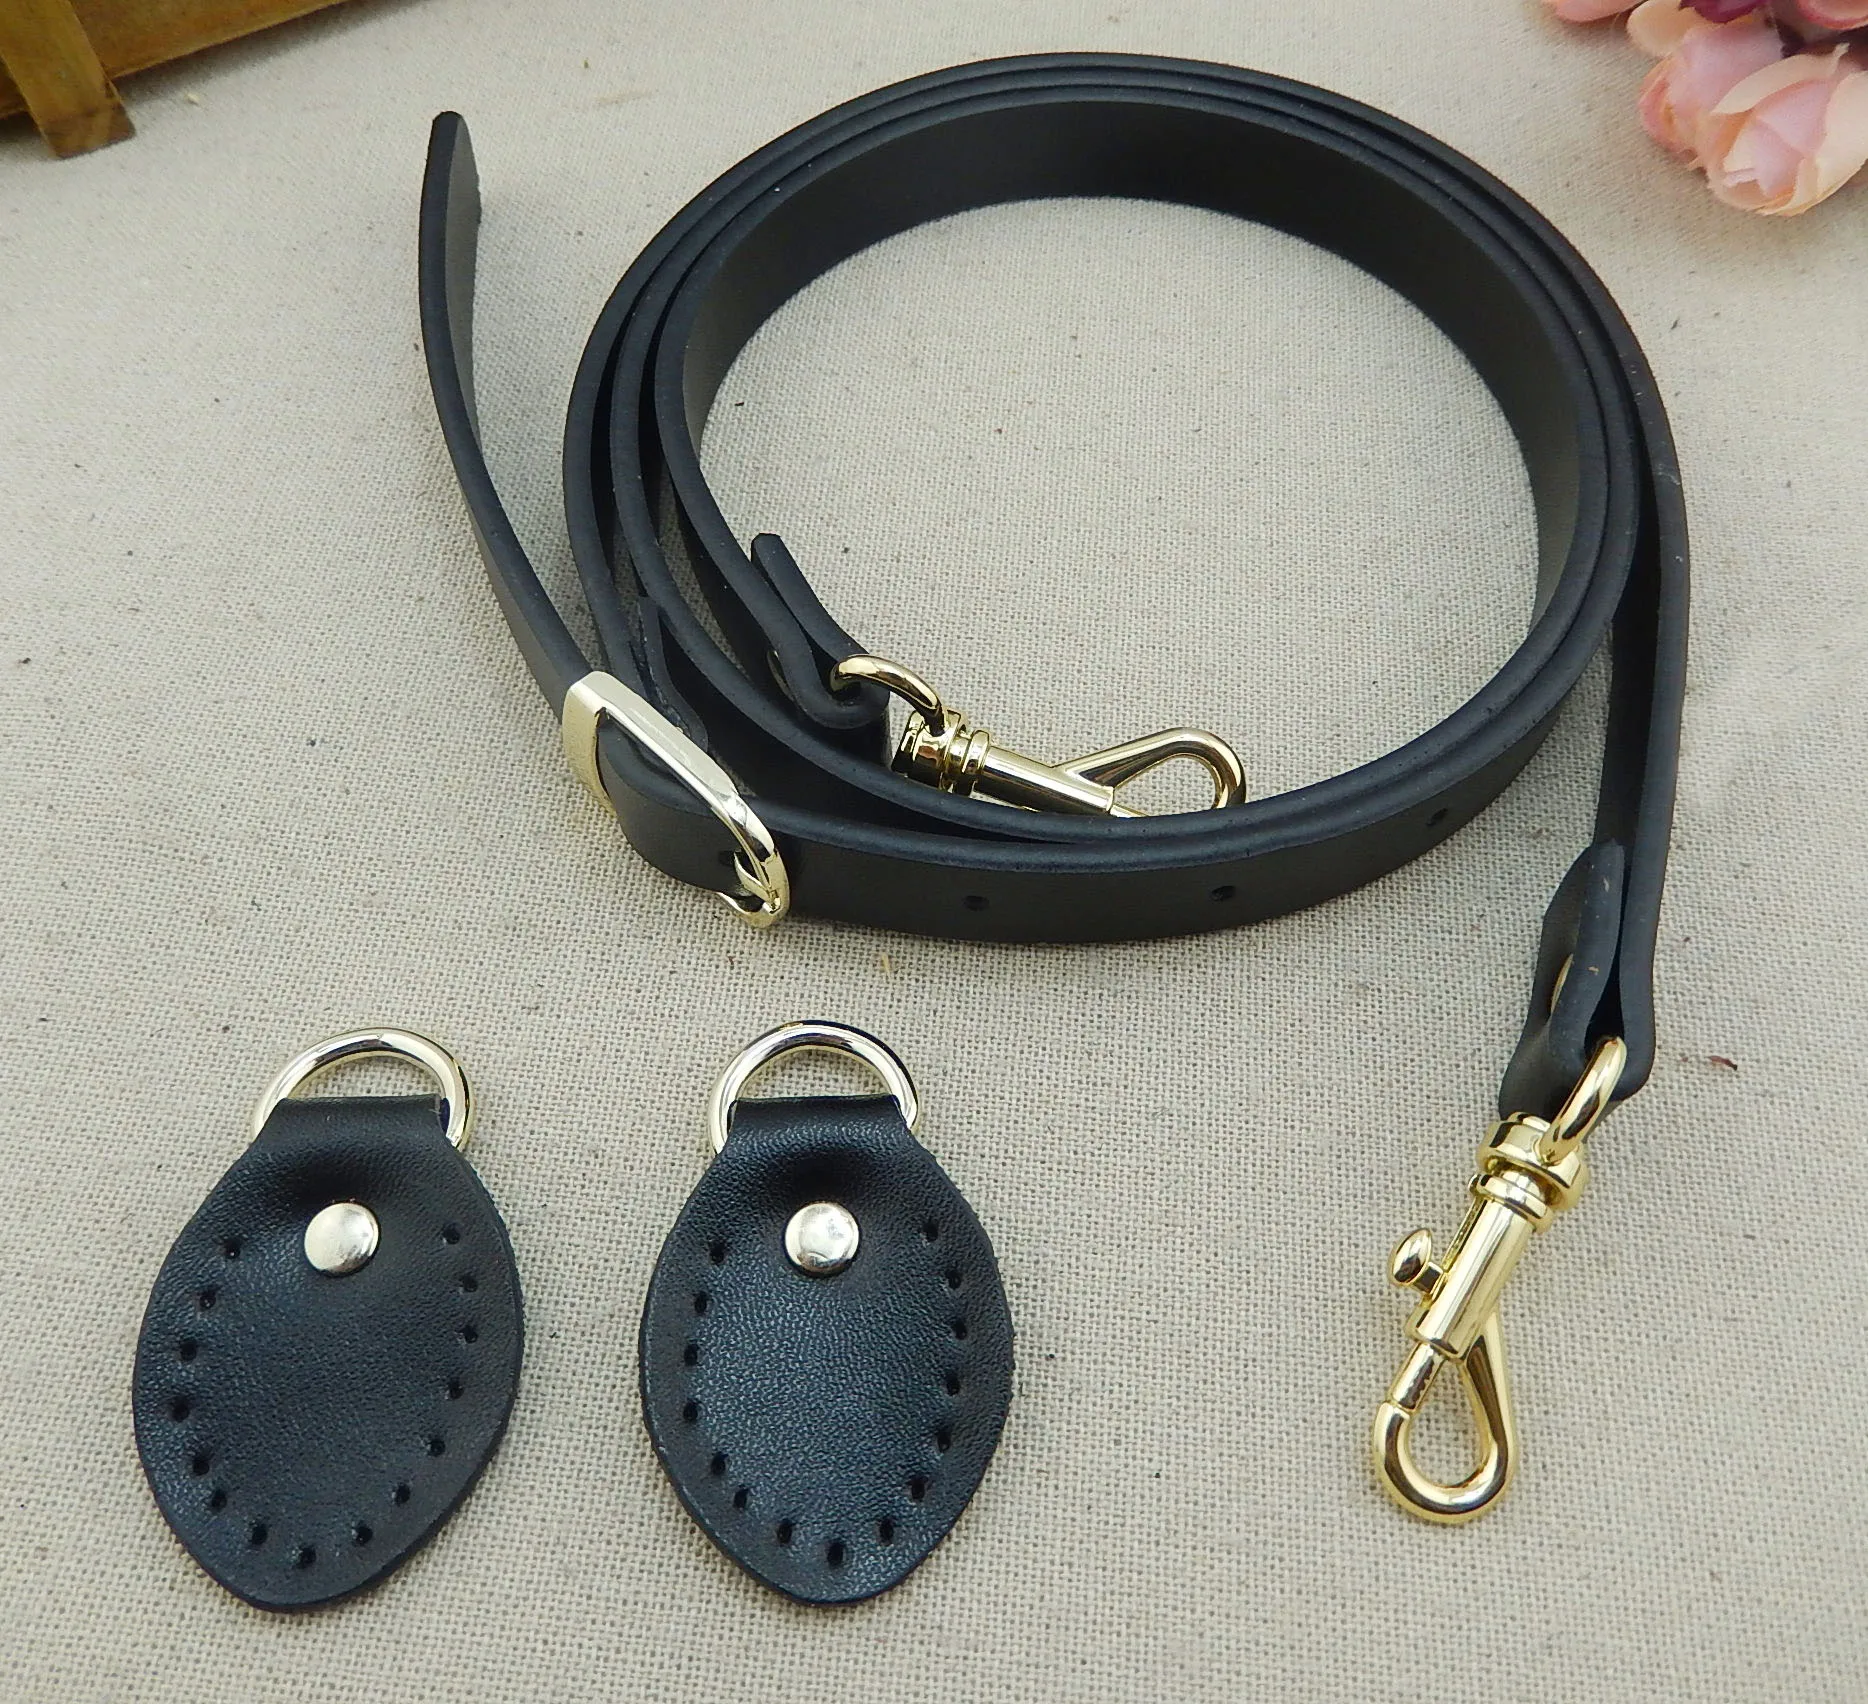 120cm Or 47 Inches Long Fauxleather Shoulder Bag Strap With Stocks ...